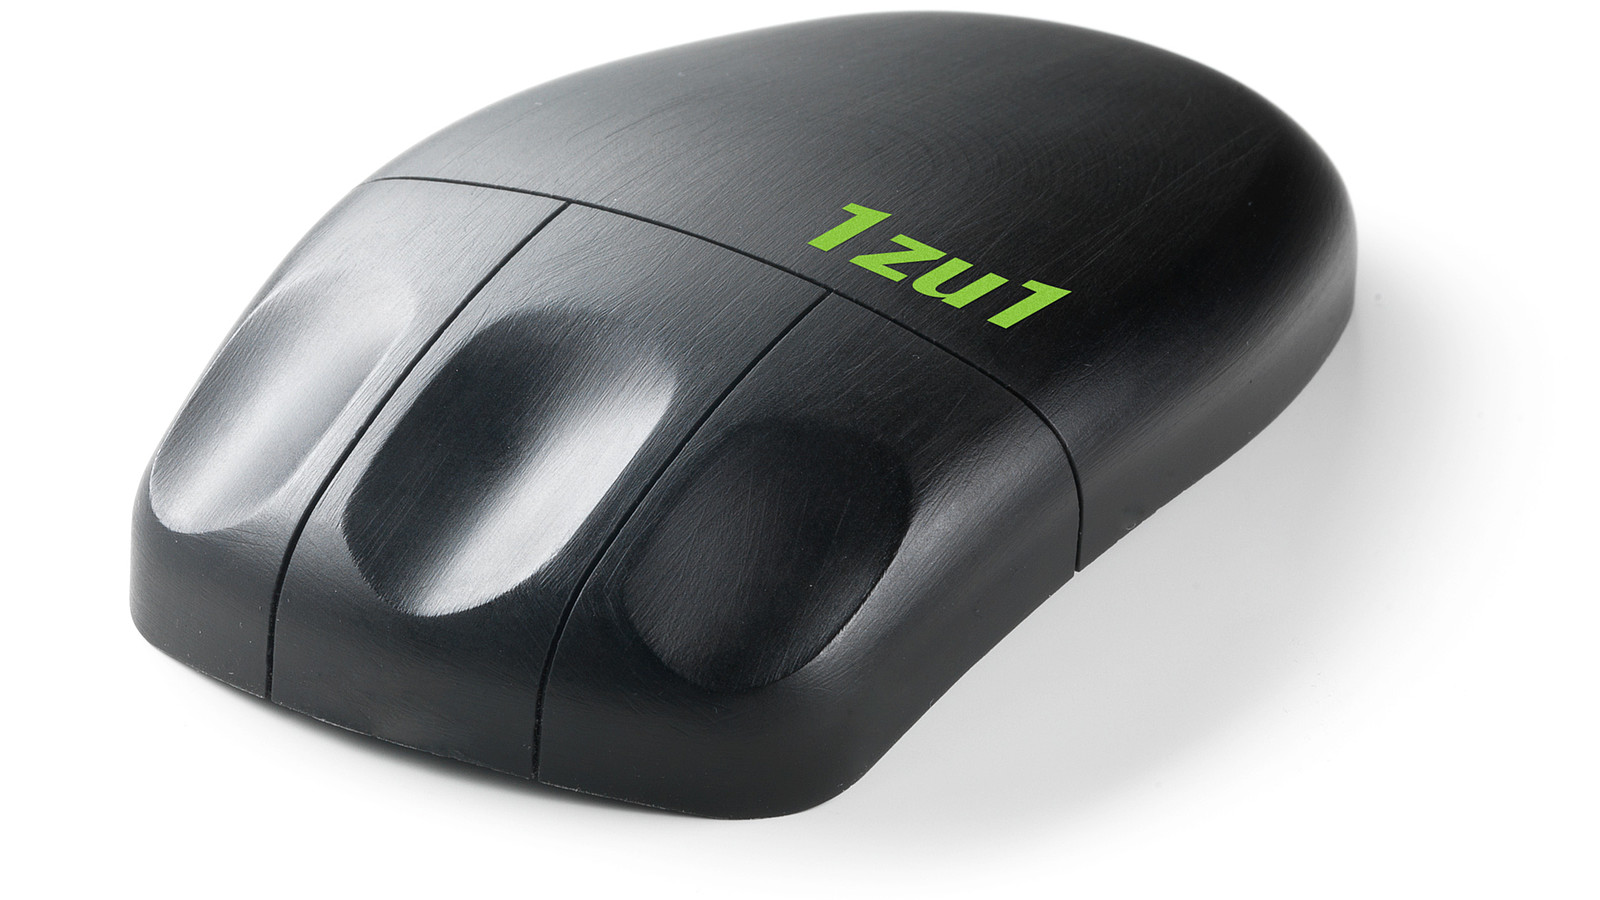 Matte black plastic mouse with green 1zu1 font